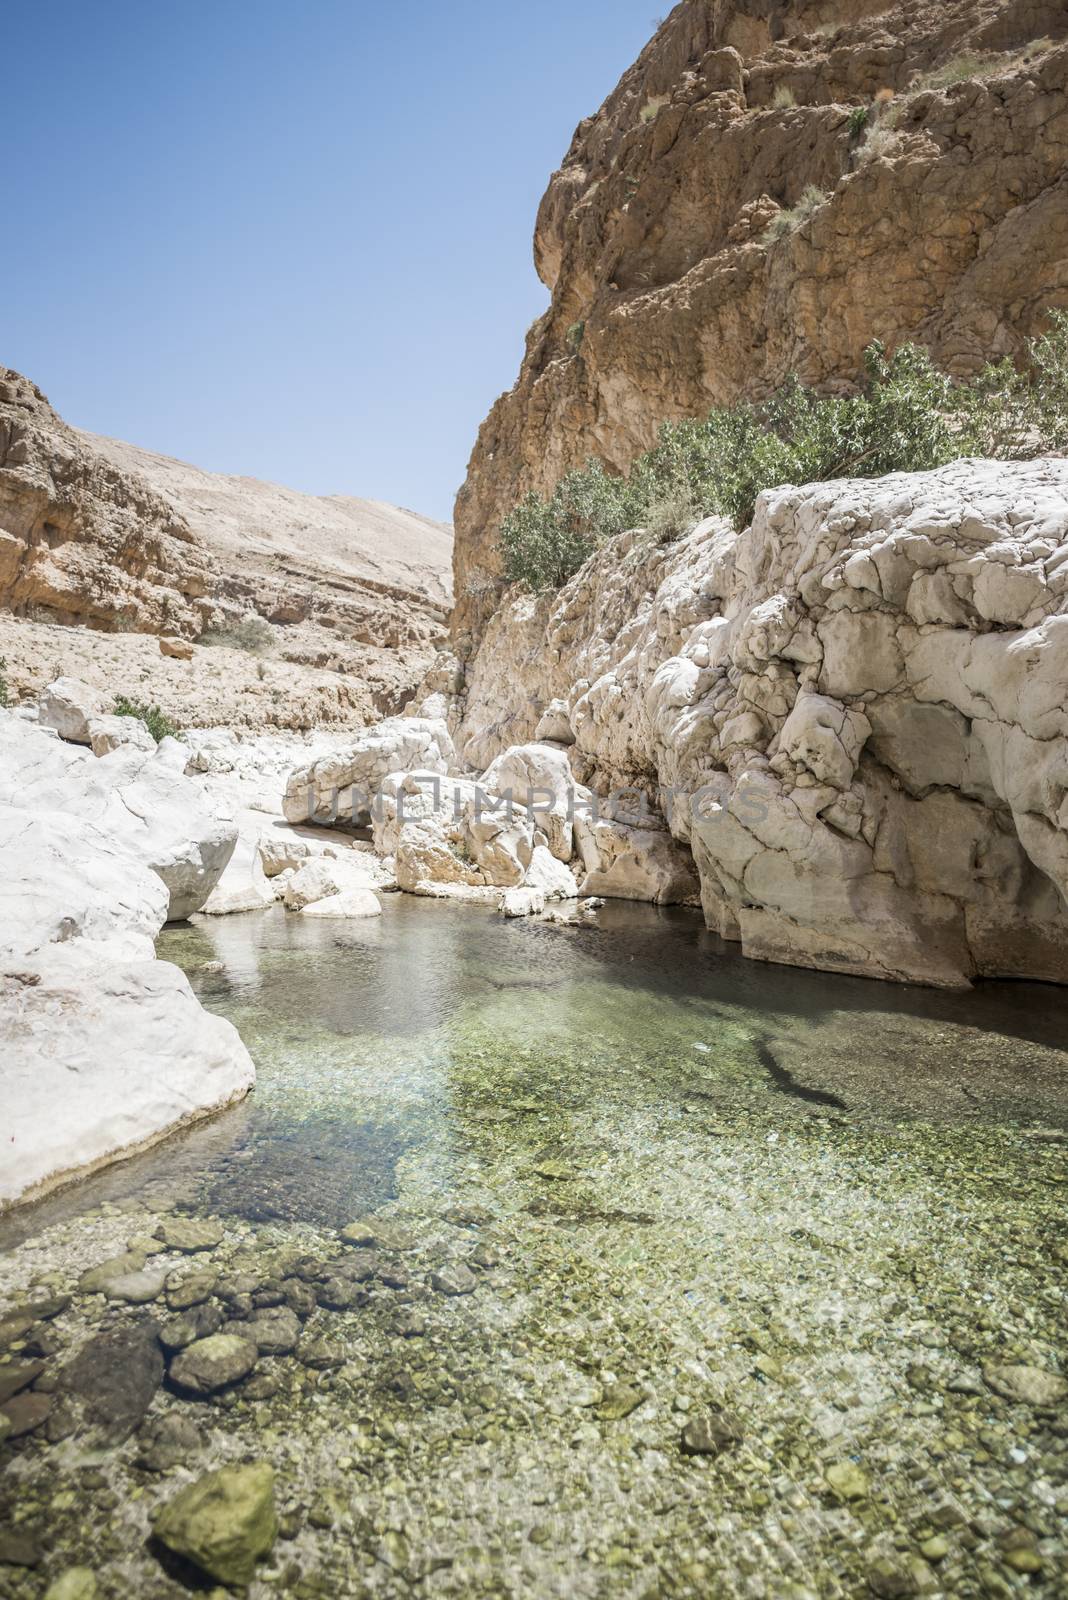 Turquoise water of the river going thru the canyon of Wadi Bani Khalid, Sultanate of Oman. This is one of the most visited place of the country